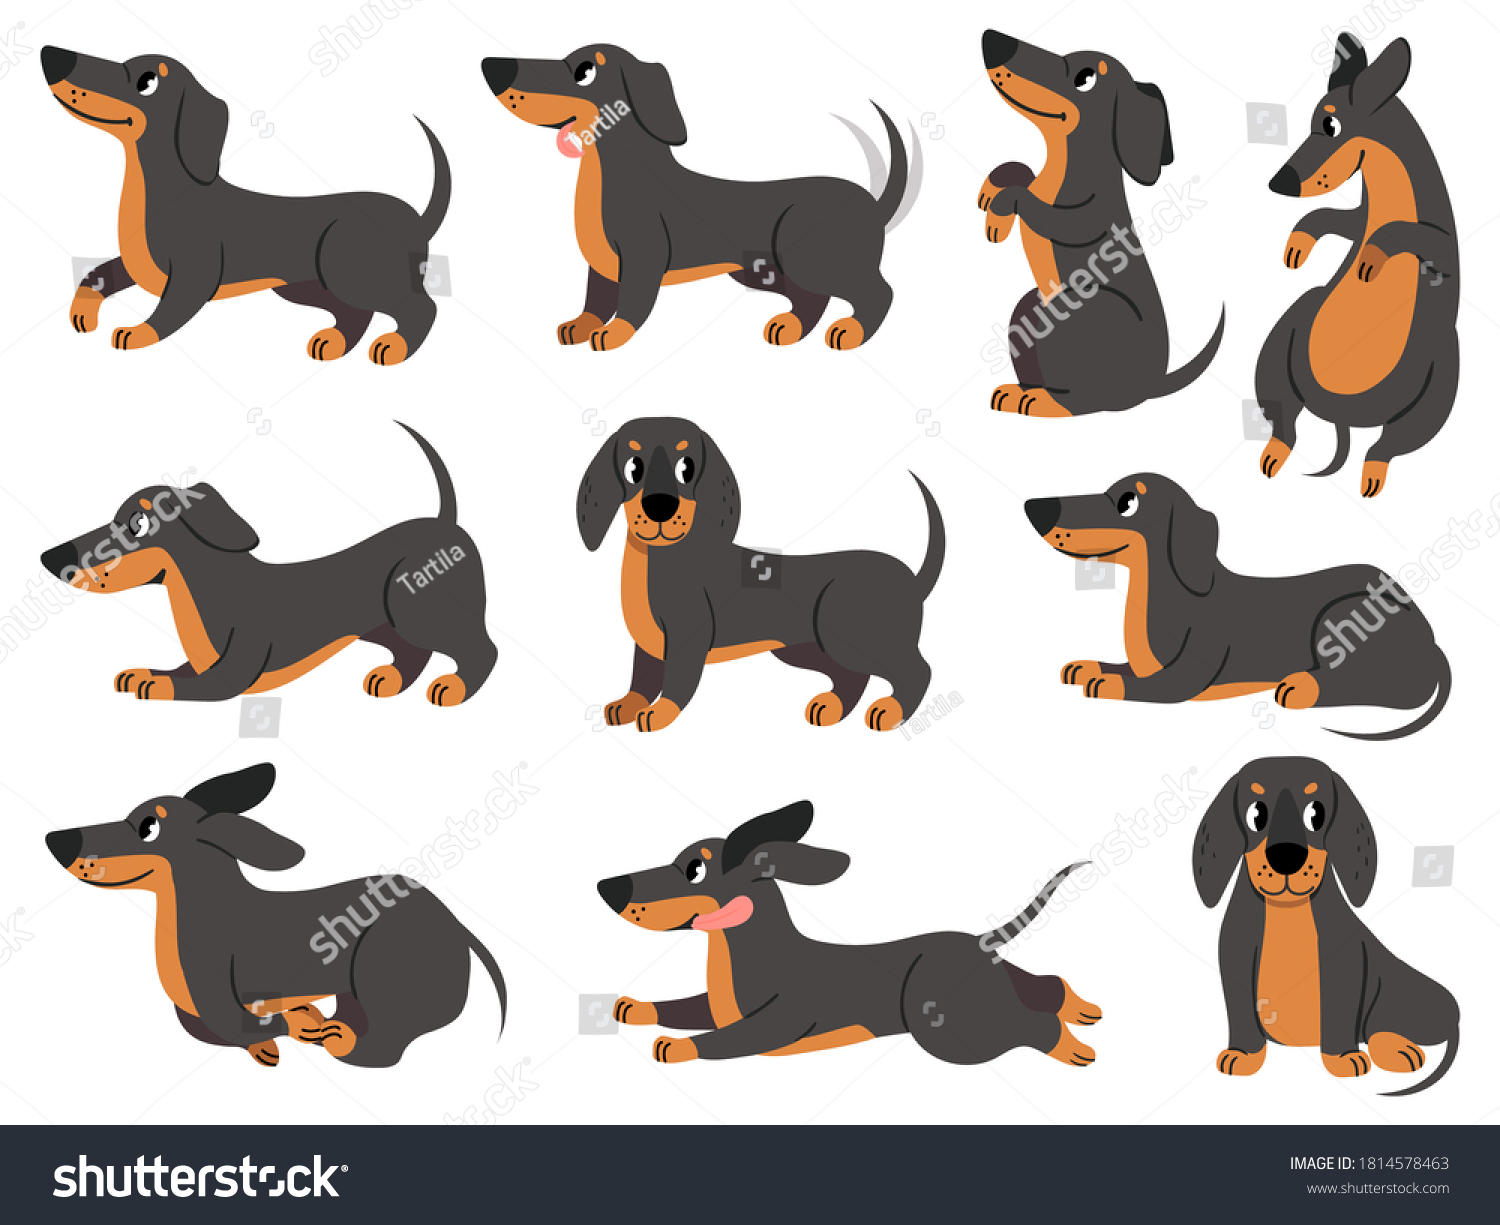 SVG of Dachshund. Cute dogs characters various poses hunting breed, design for prints, textile or card, adorable dachshund cartoon vector set. Dachshund pose, dog pedigree drawing, domestic pet illustration svg